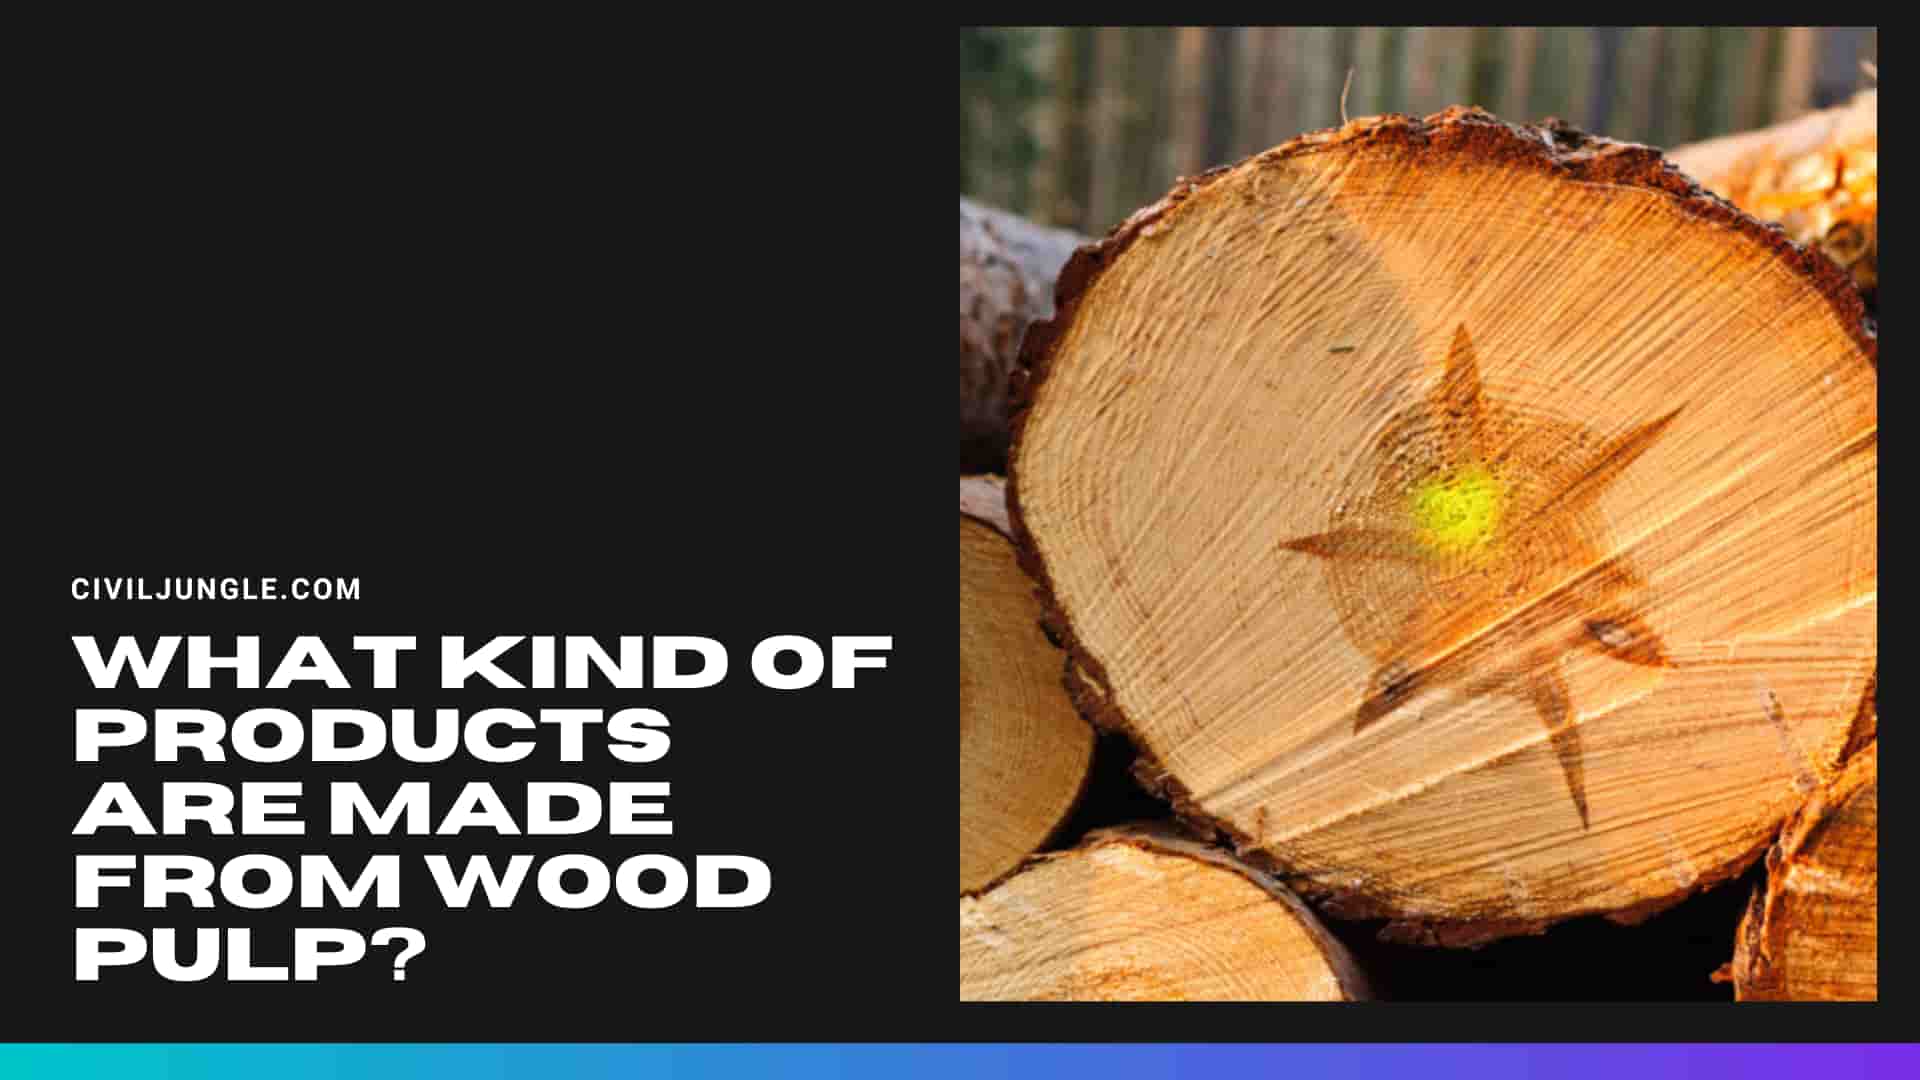 What Kind of Products Are Made from Wood Pulp?